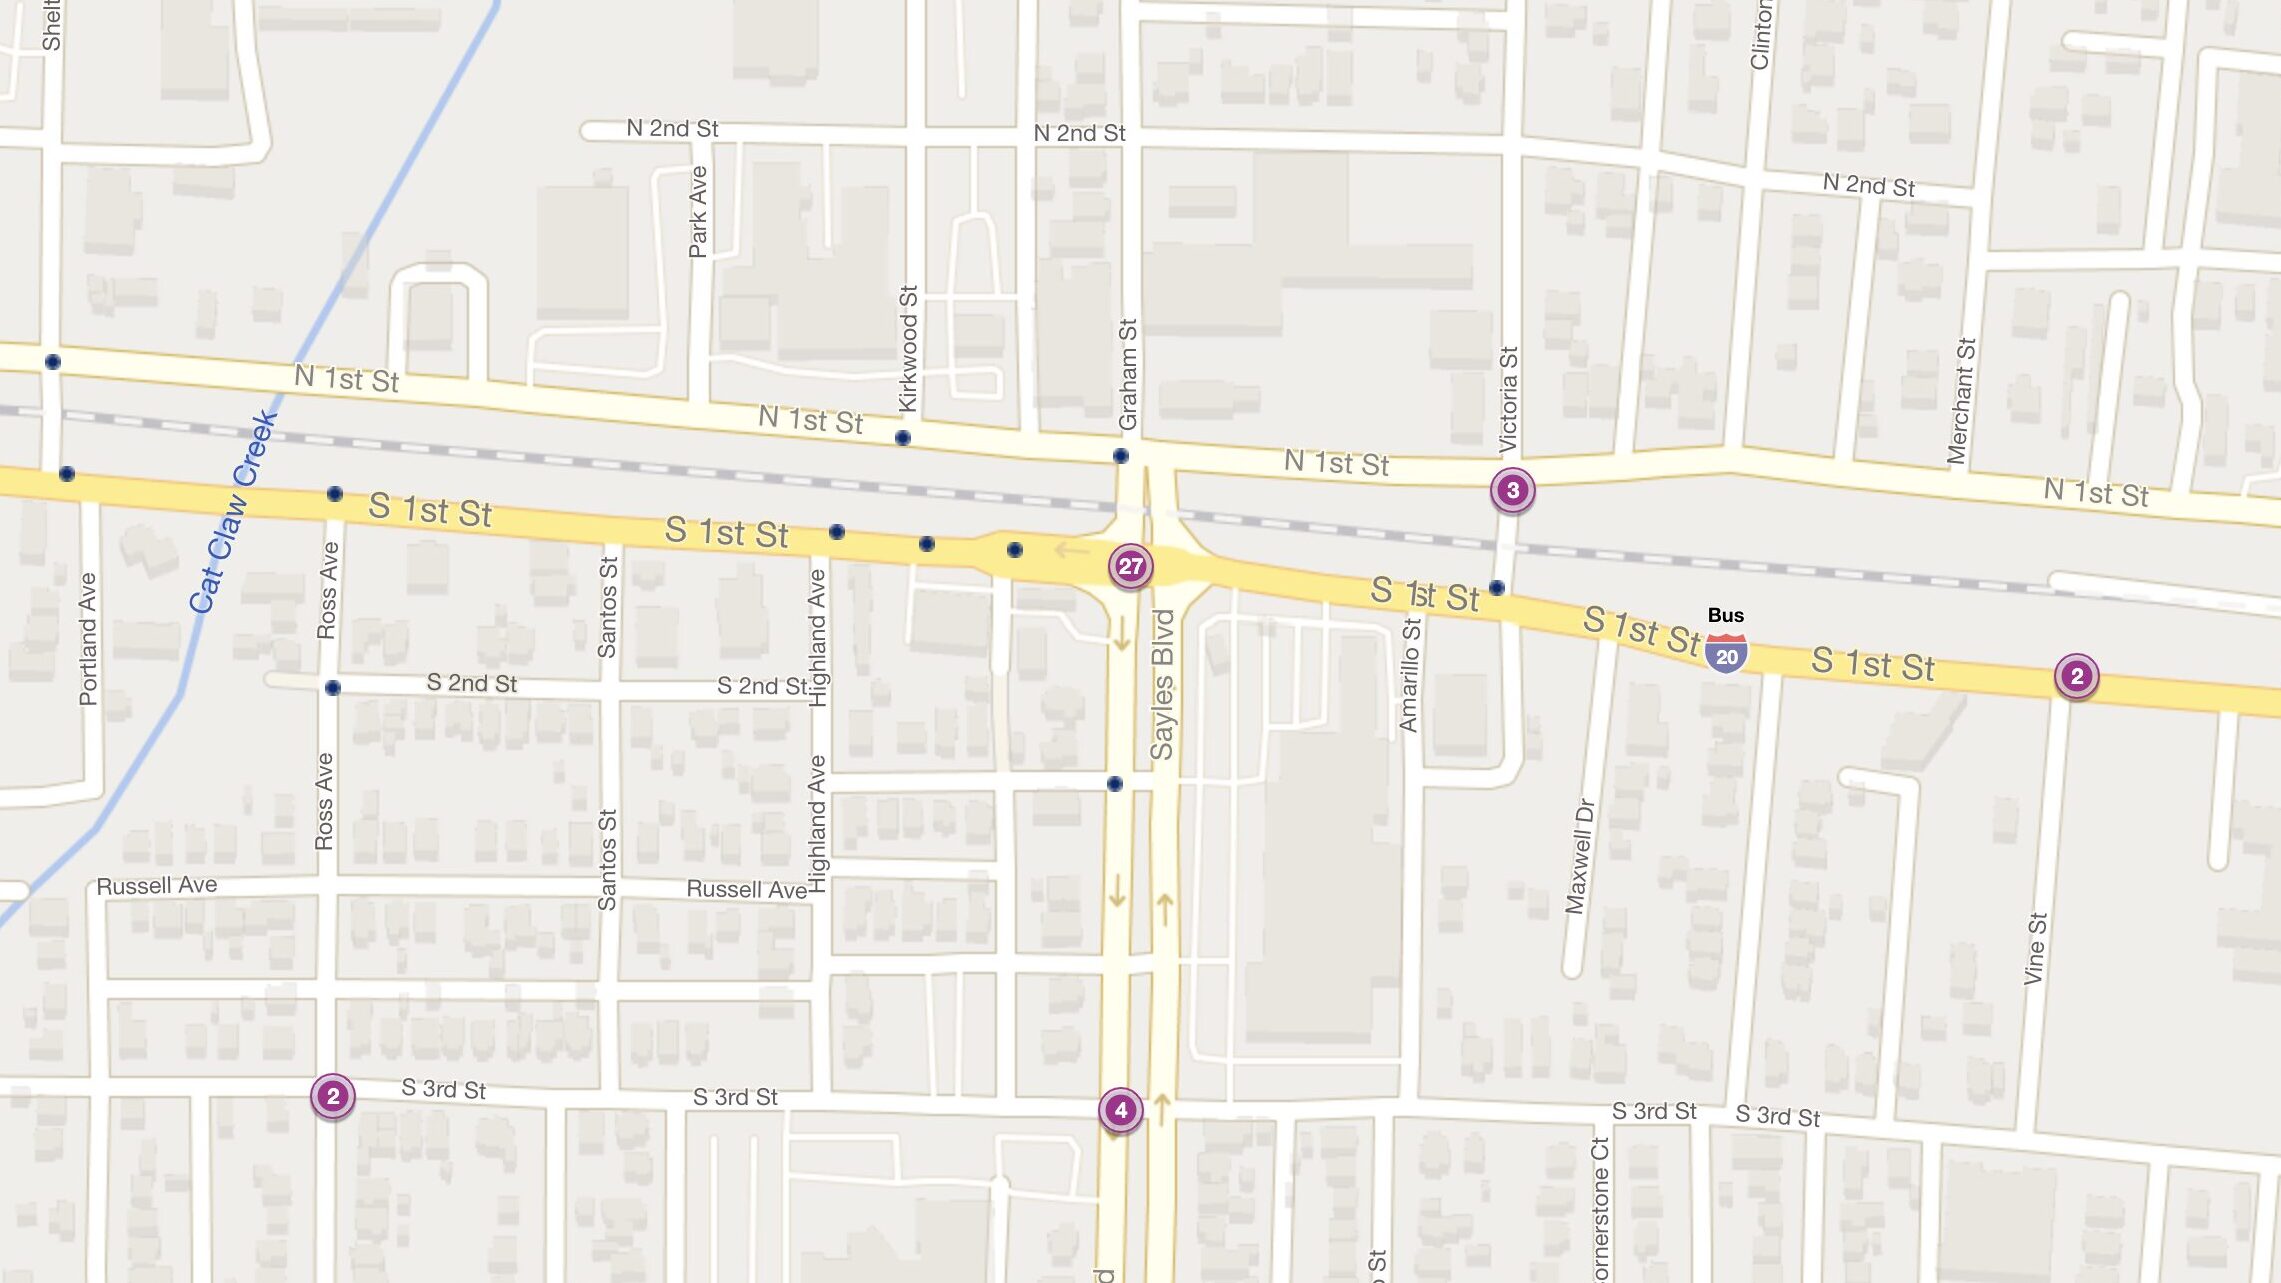 Cluster Map of 2023 Car Accidents at 1st St. & Sayles Blvd. (TXDOT)